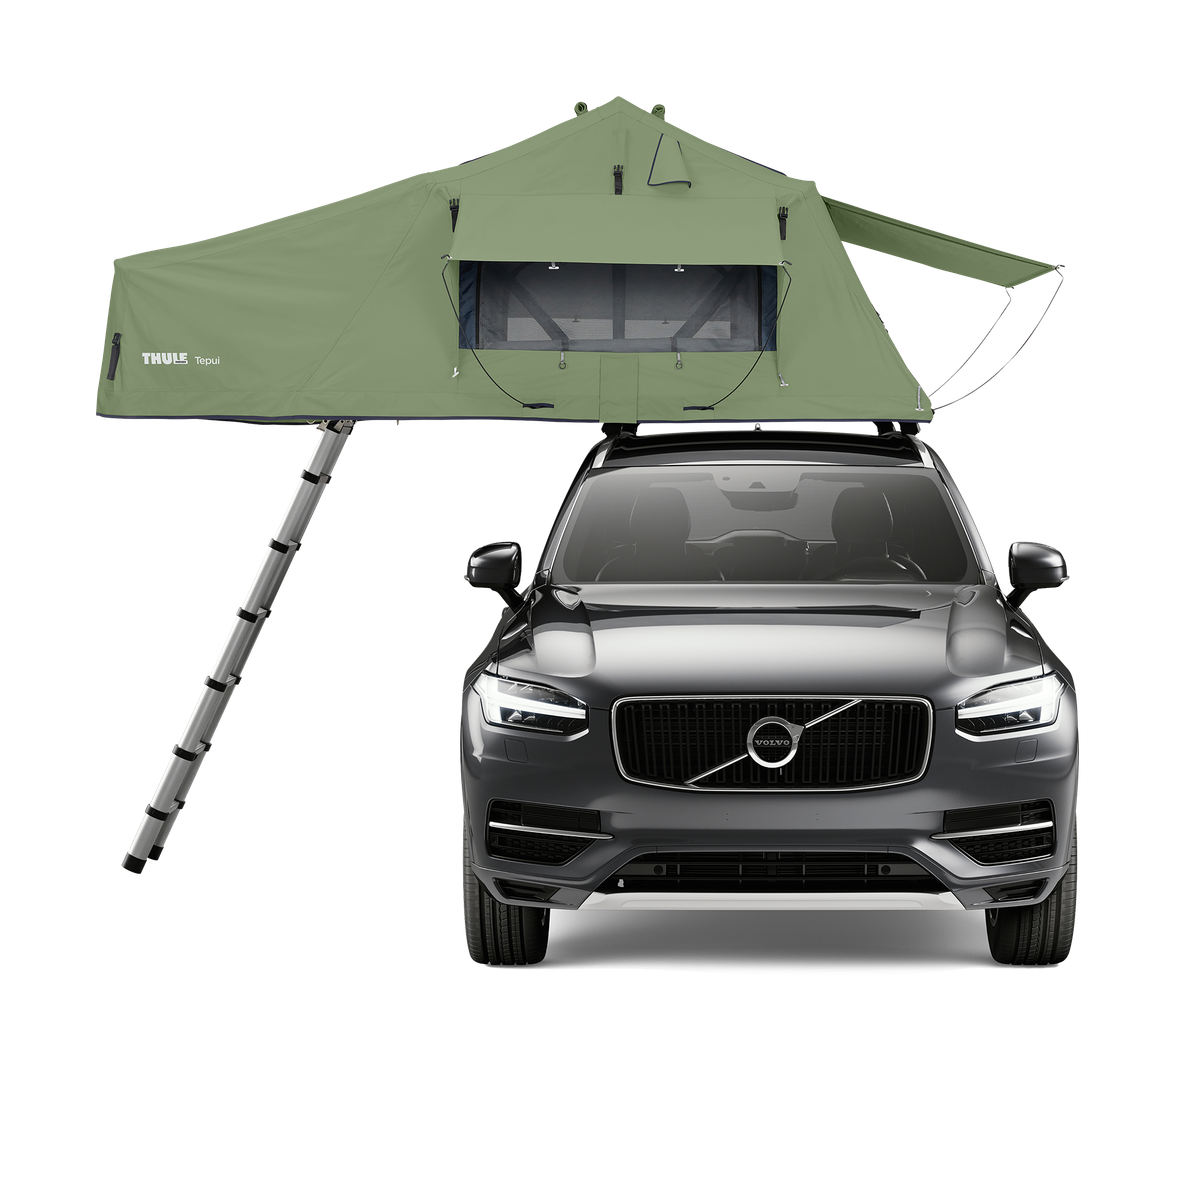 Thule Tepui Autana 3-person roof top tent olive green